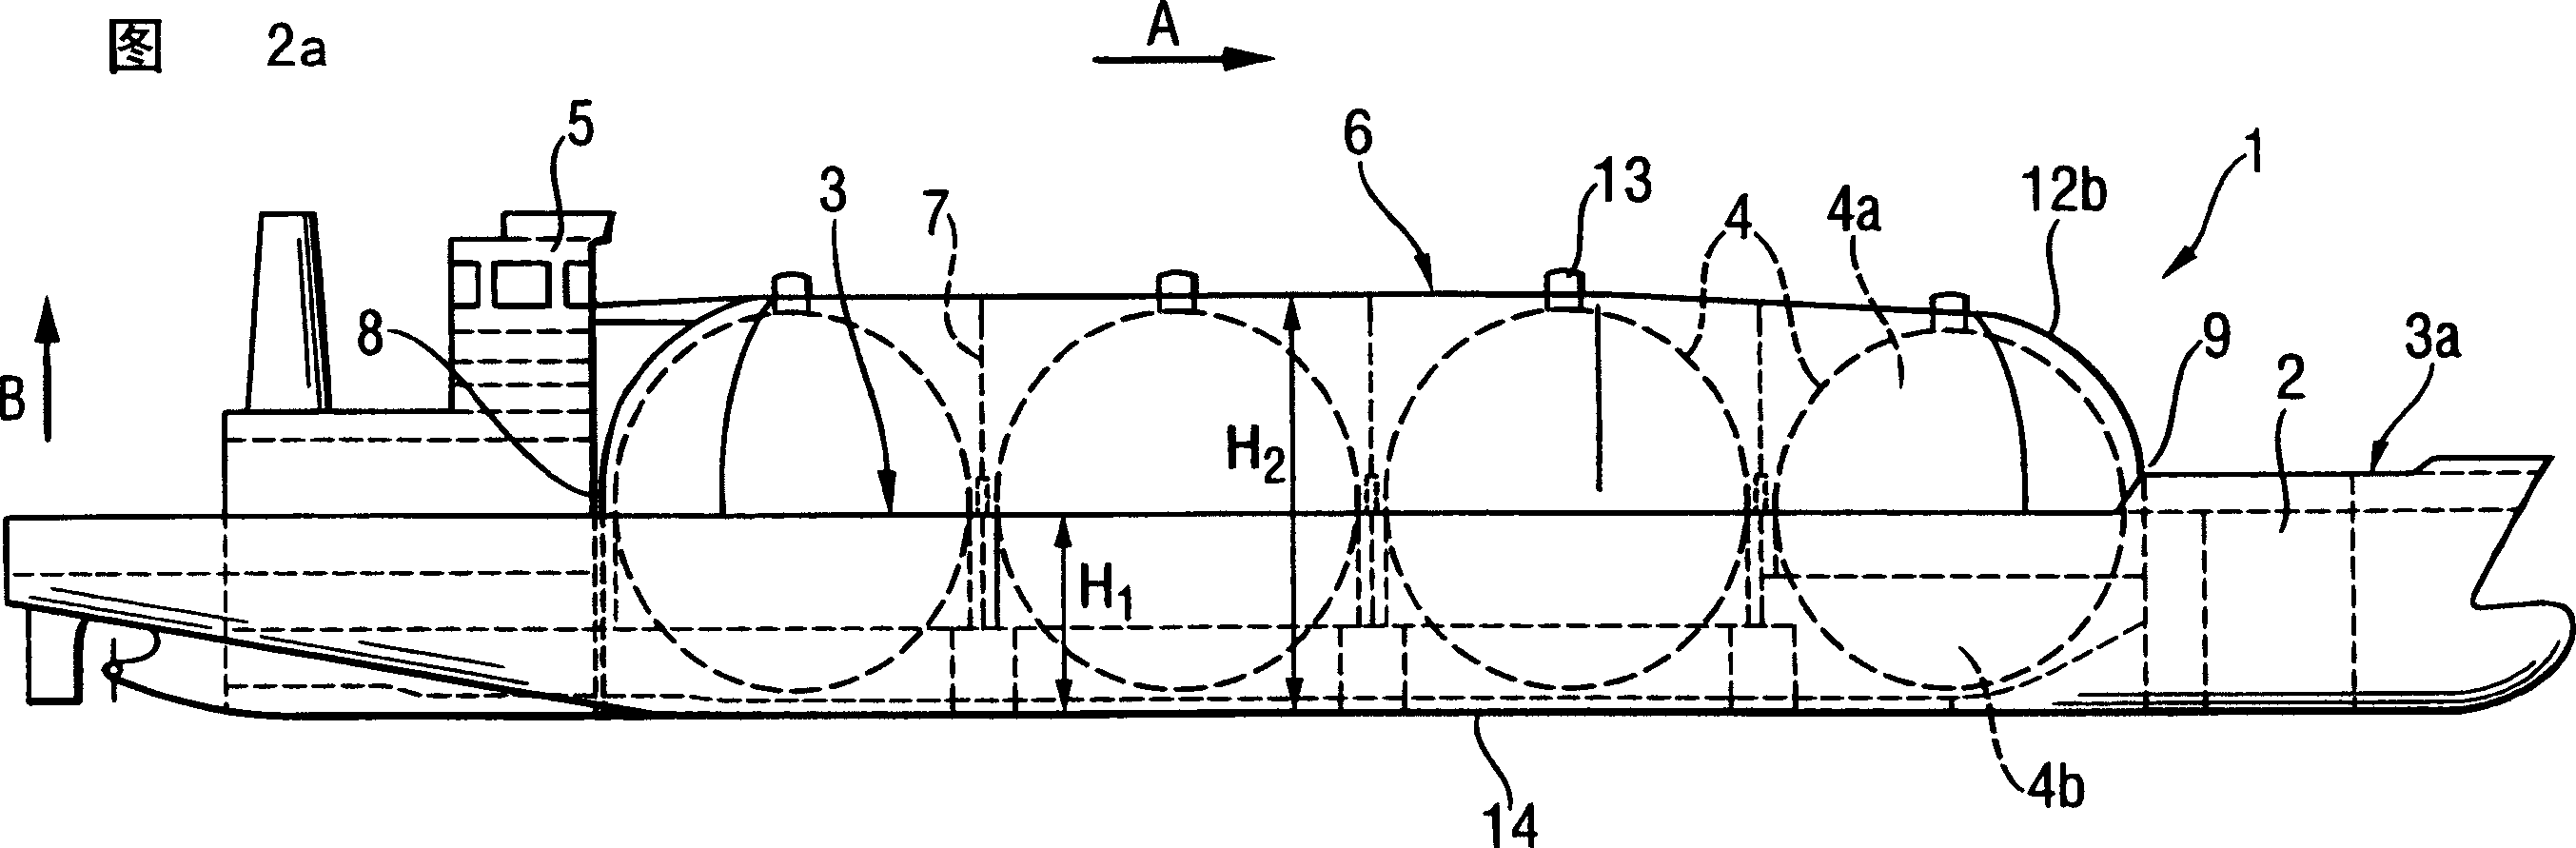 A method and an arrangement for reducing the weight and optimizing the longitudinal strength of a water-craft